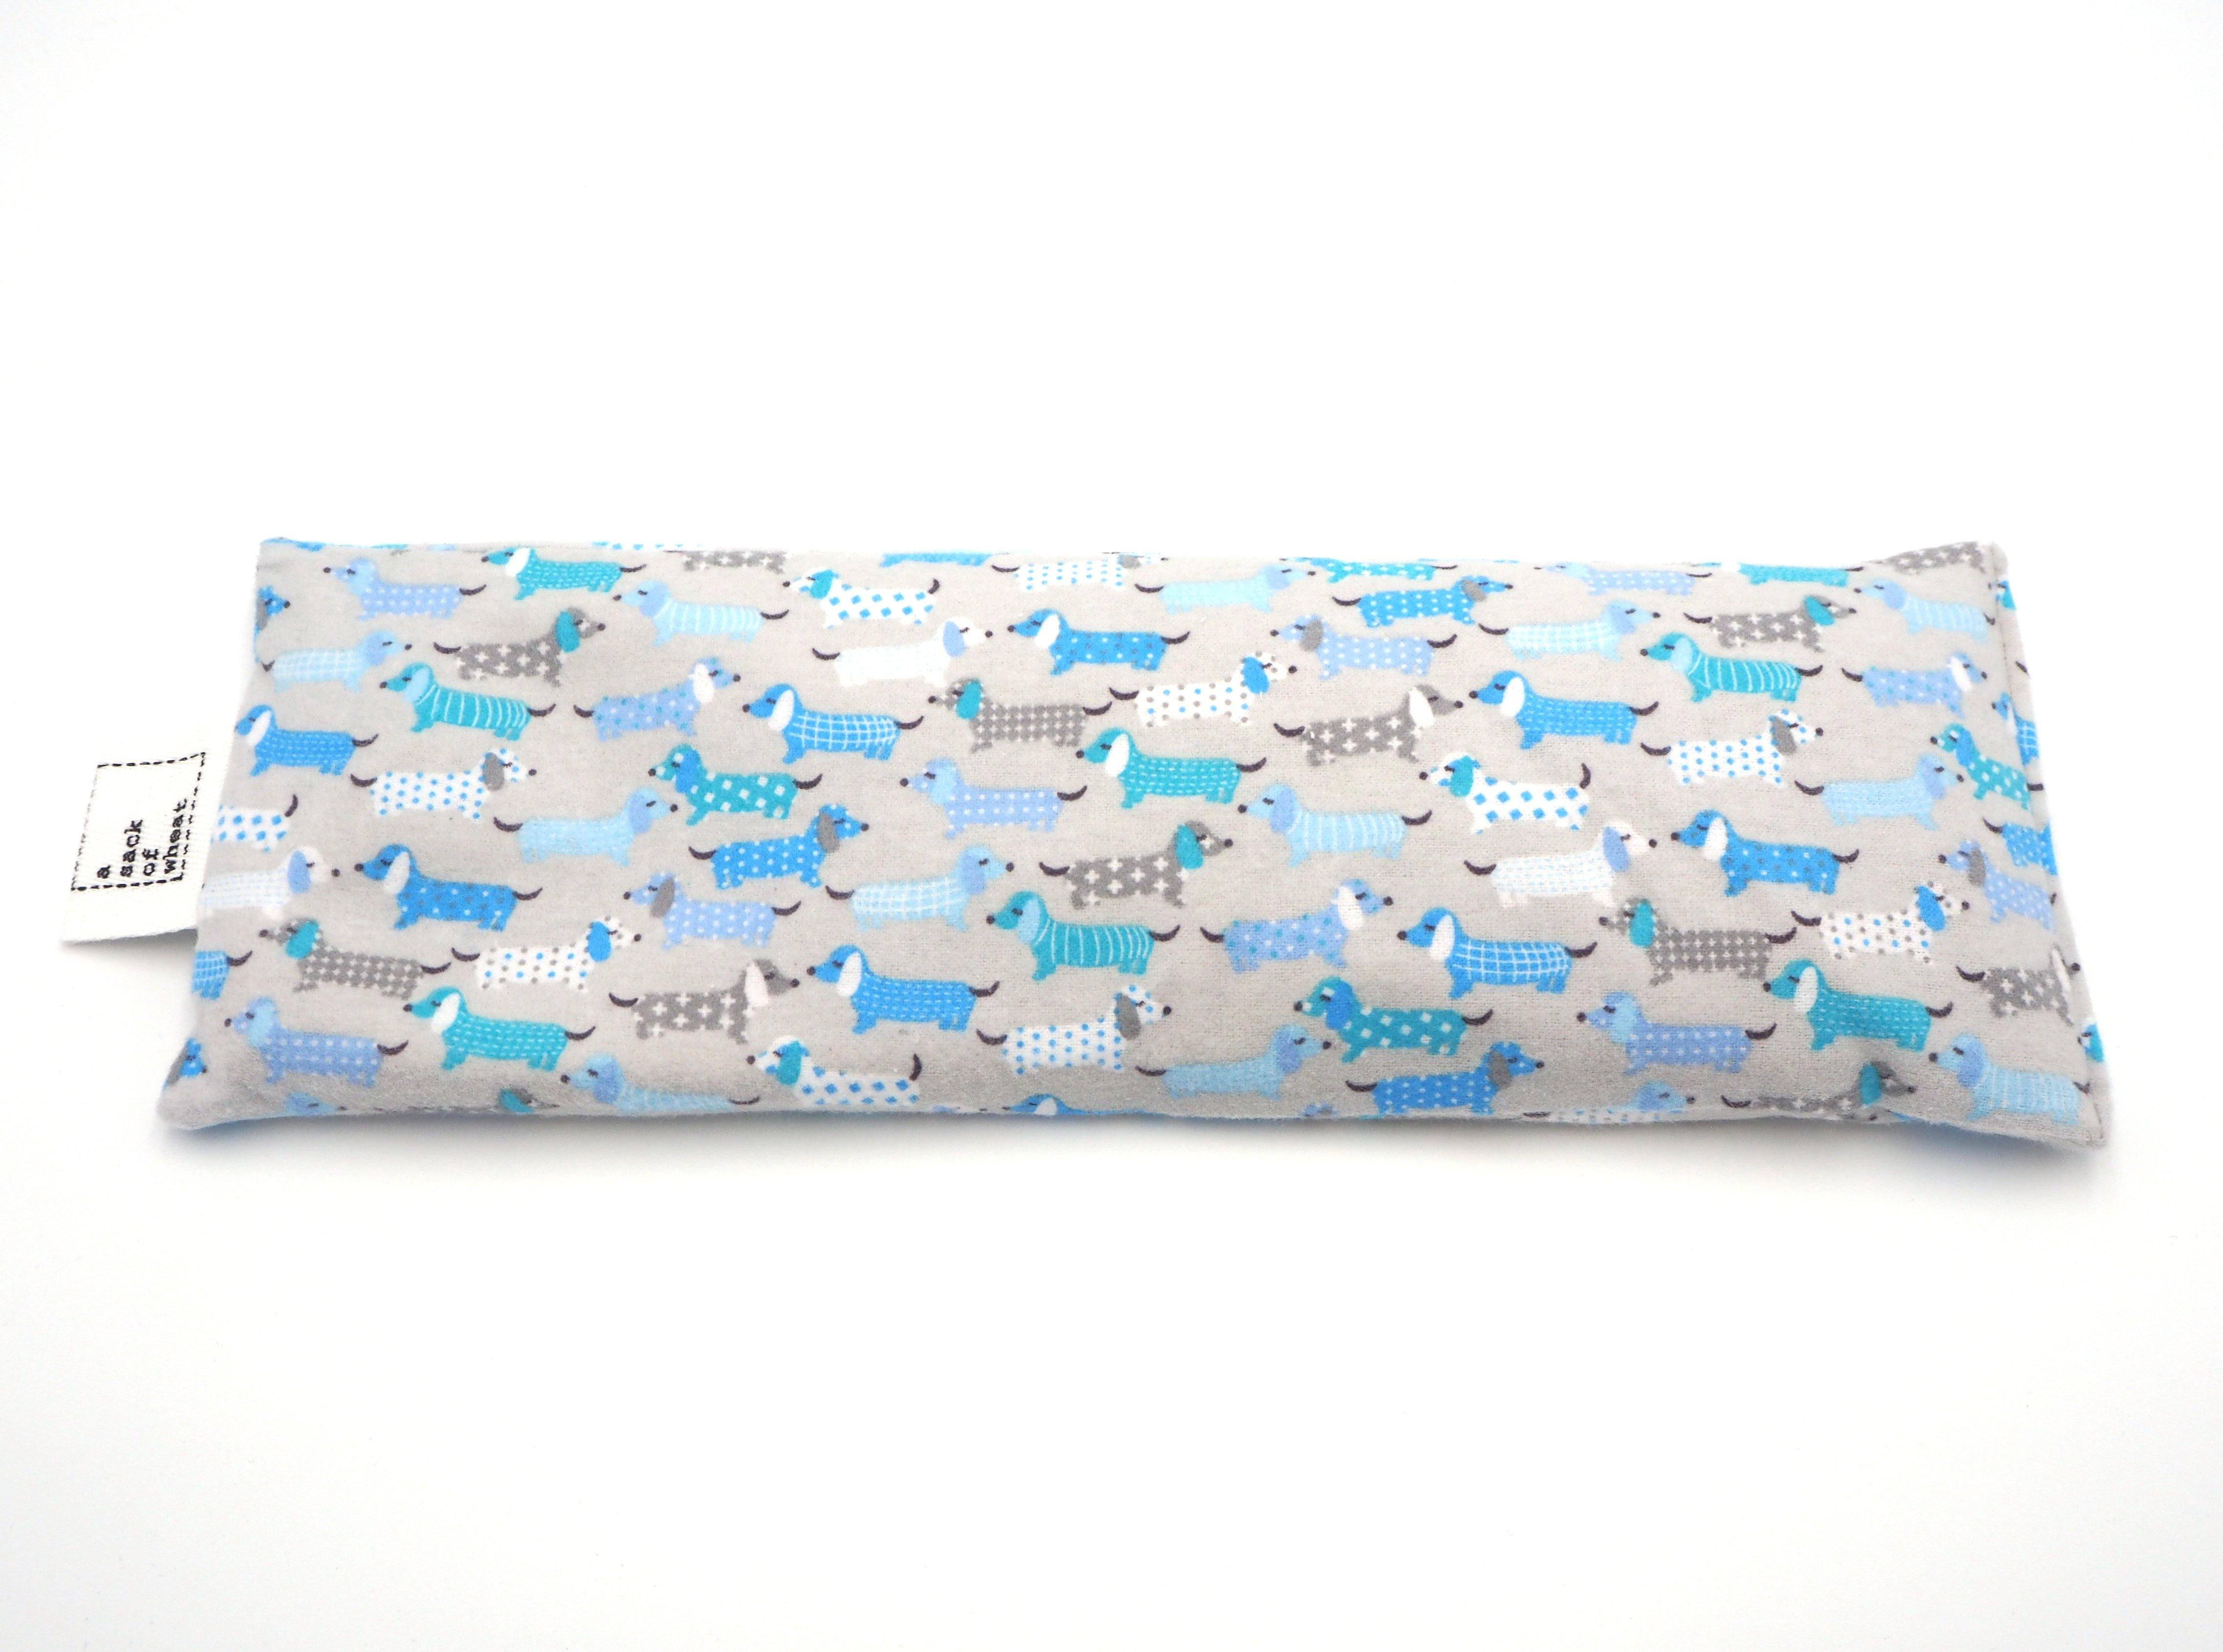 A Sack Of Wheat, flat view of cute puppy's in PJ's on baby blue flannelette cotton fabric